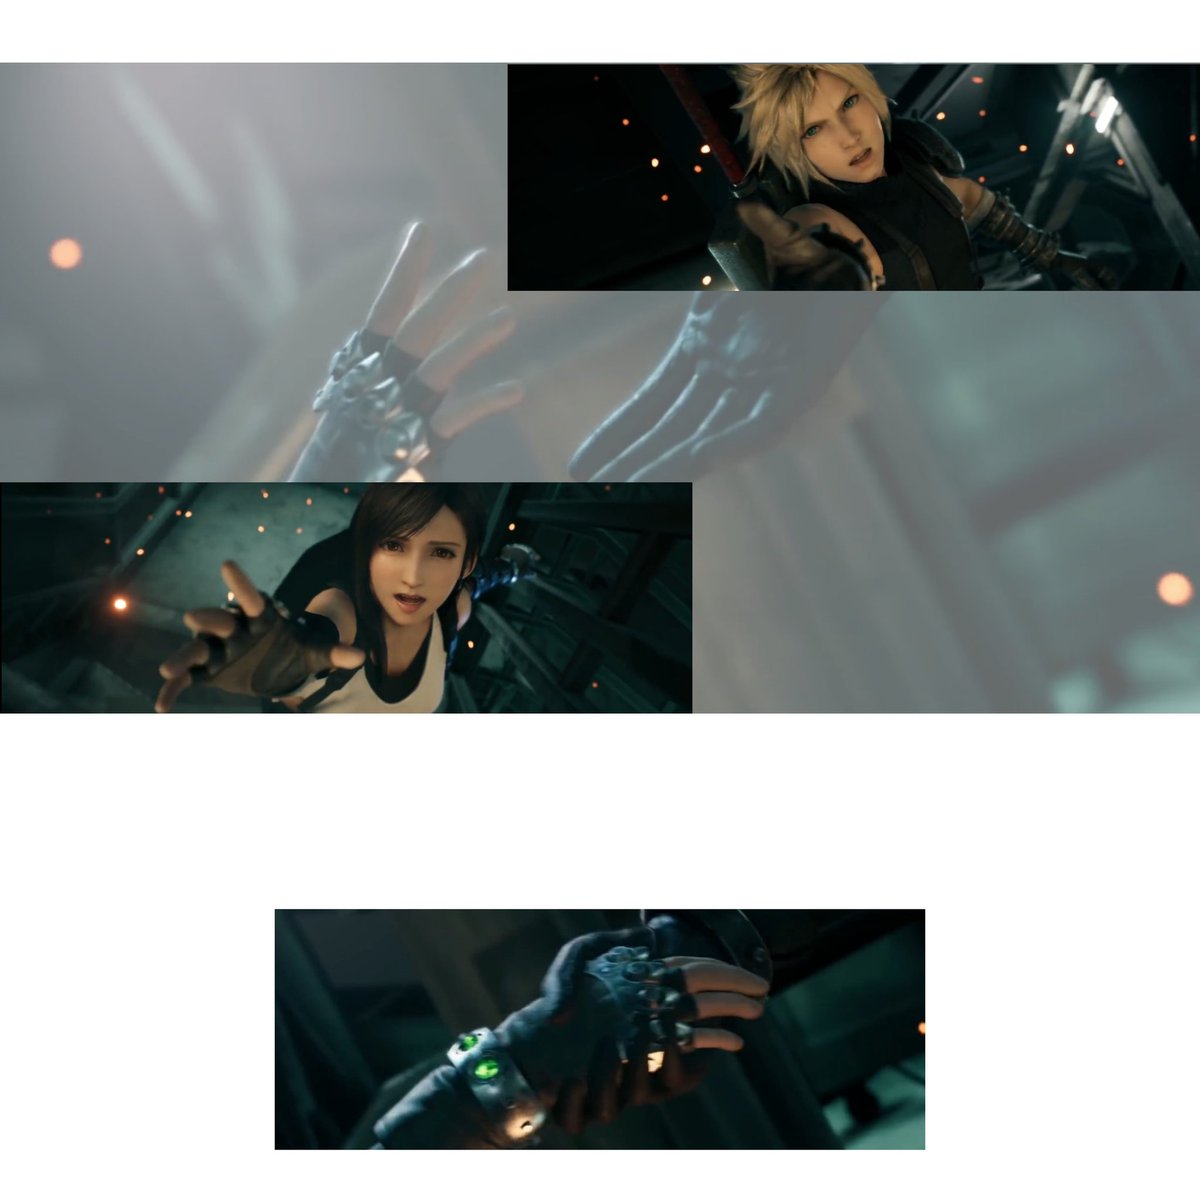 Cloud & Tifa went up to the tower together but it's developed in 7R to Cloud went up alone followed by Tifa. The result is we get them reach out eo hands in a slowmo-dramatic way added by SE